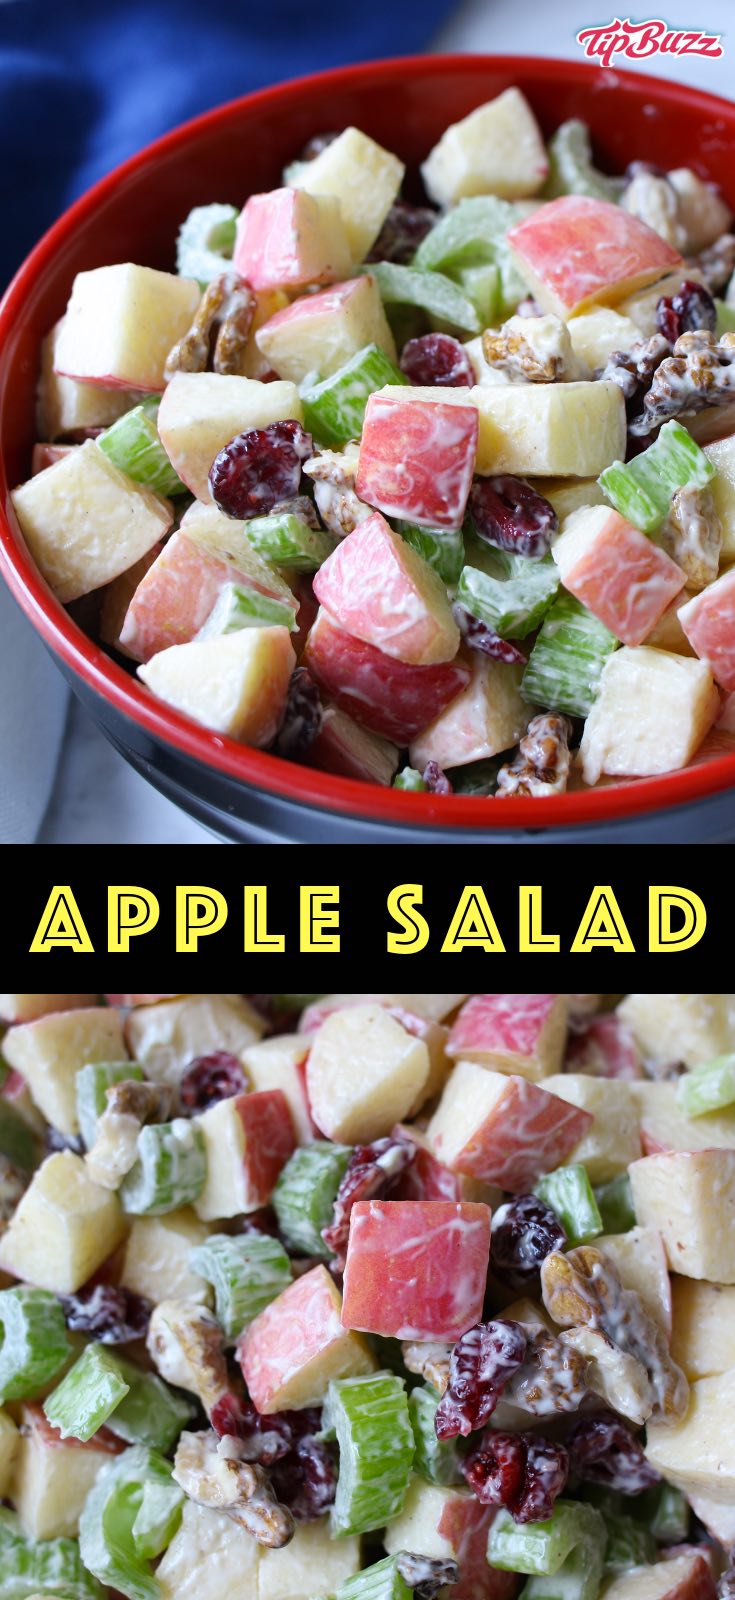 Apple Salad is a healthy lunch or side dish with a nice crunch. It comes together in about 10 minutes using simple ingredients: apples, walnuts, celery, raisins and mayonnaise or yogurt as a dressing. Perfect for parties, potlucks, barbecues and more. #applesalad